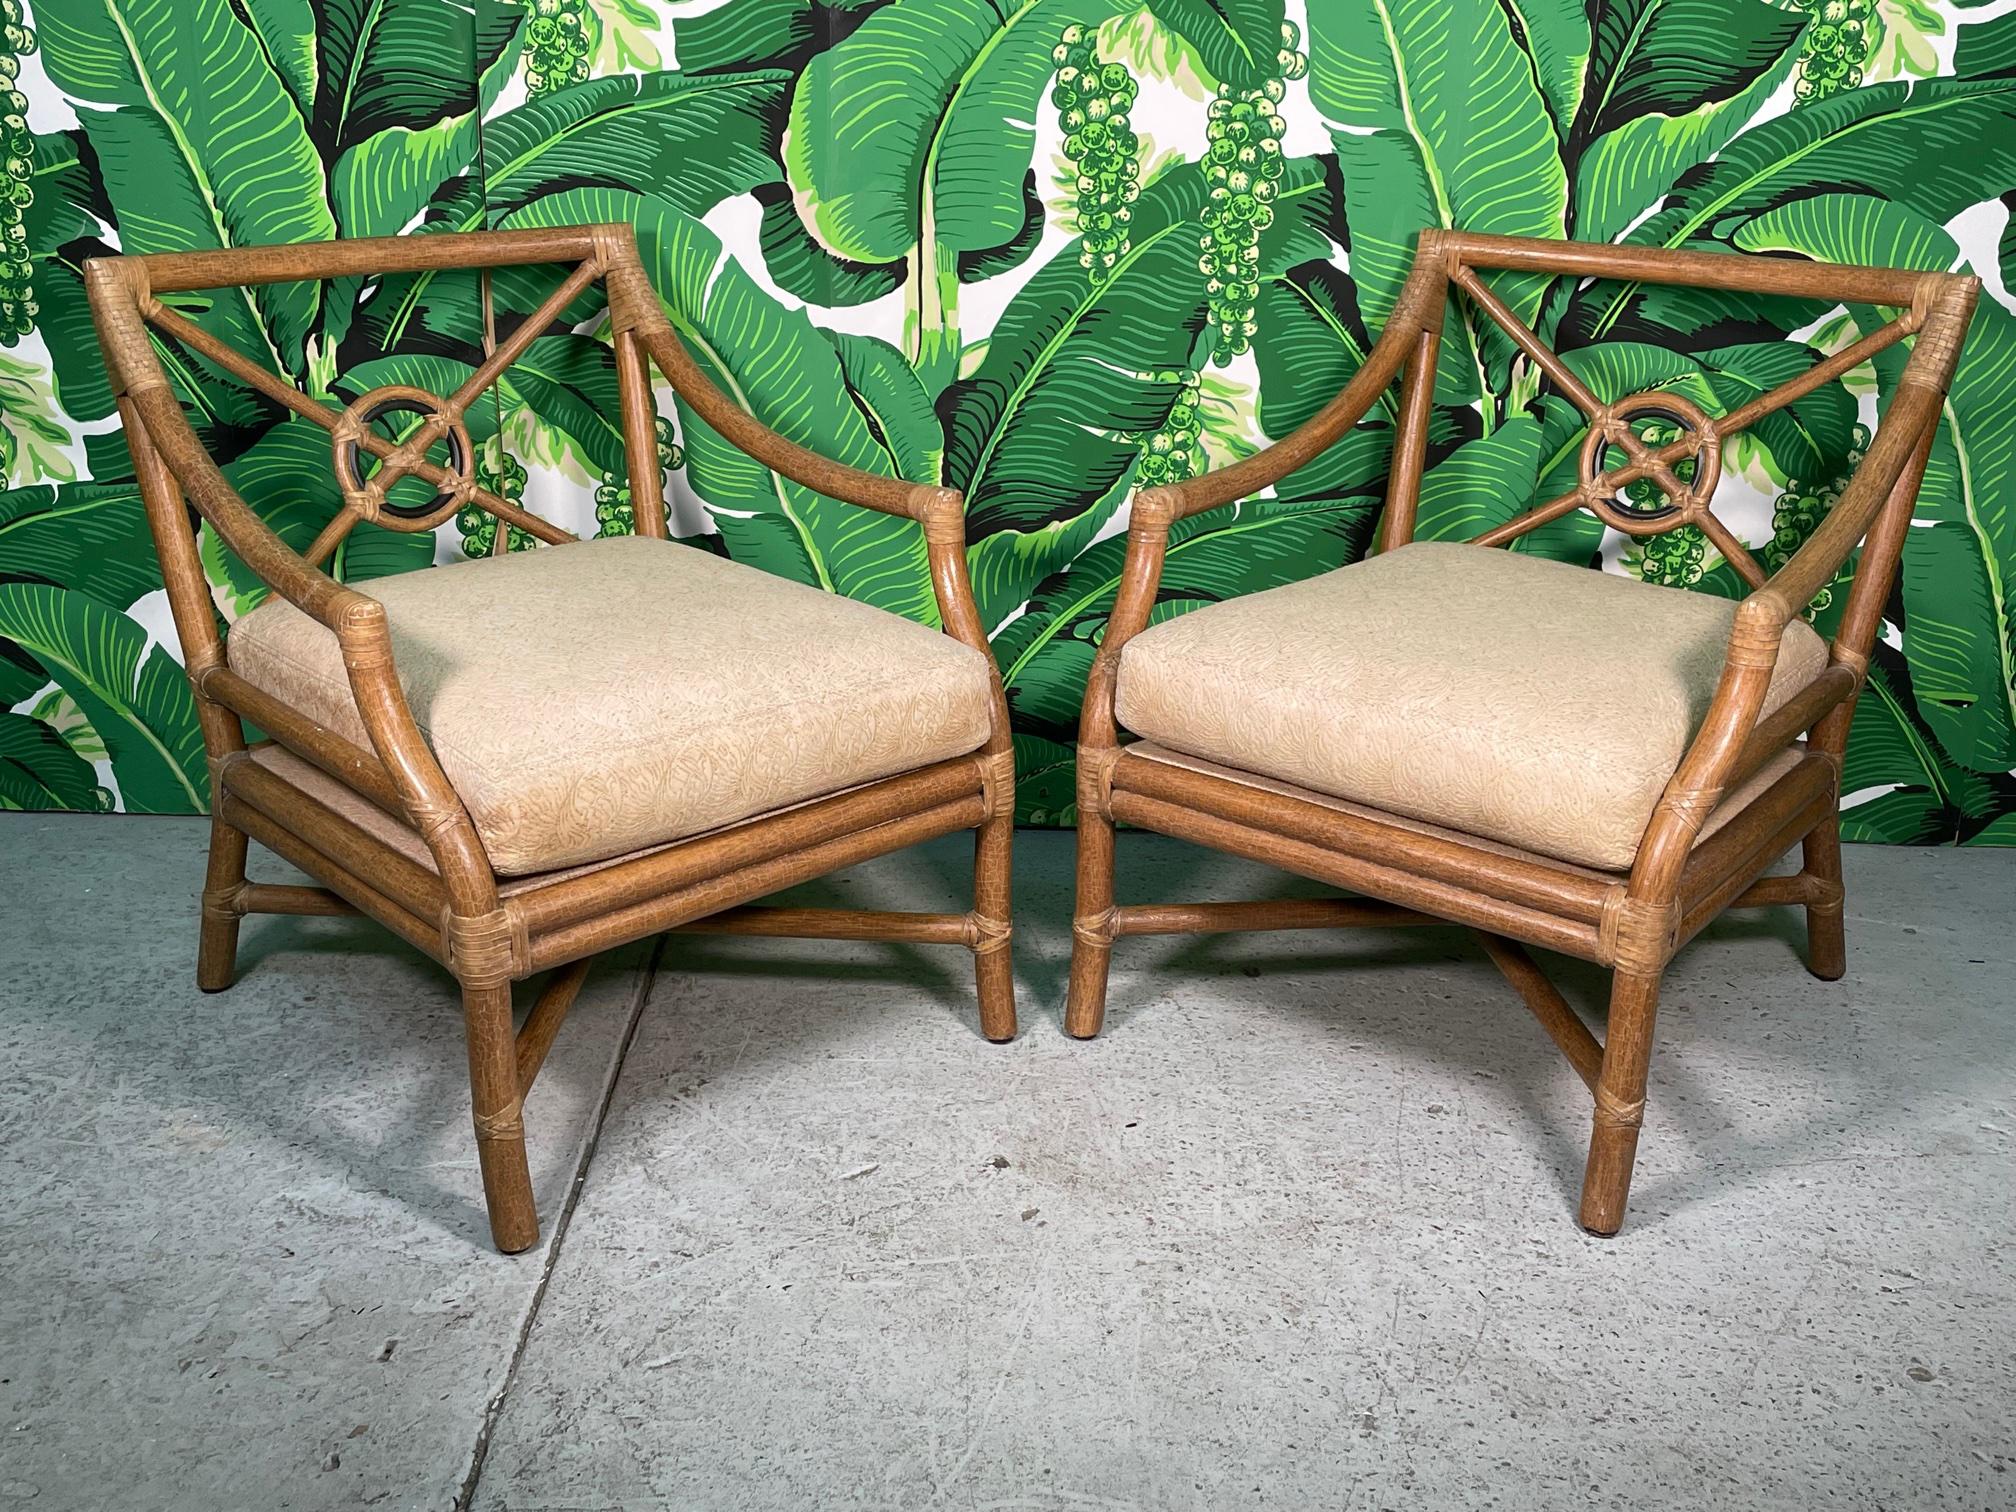 Pair of rattan arm chairs by McGuire feature the iconic target back design with an ebony ring to accent the center. Heavy rattan poles lashed with rawhide leather laces. A perfect patina to the finish and large comfortable cushions. Very solid